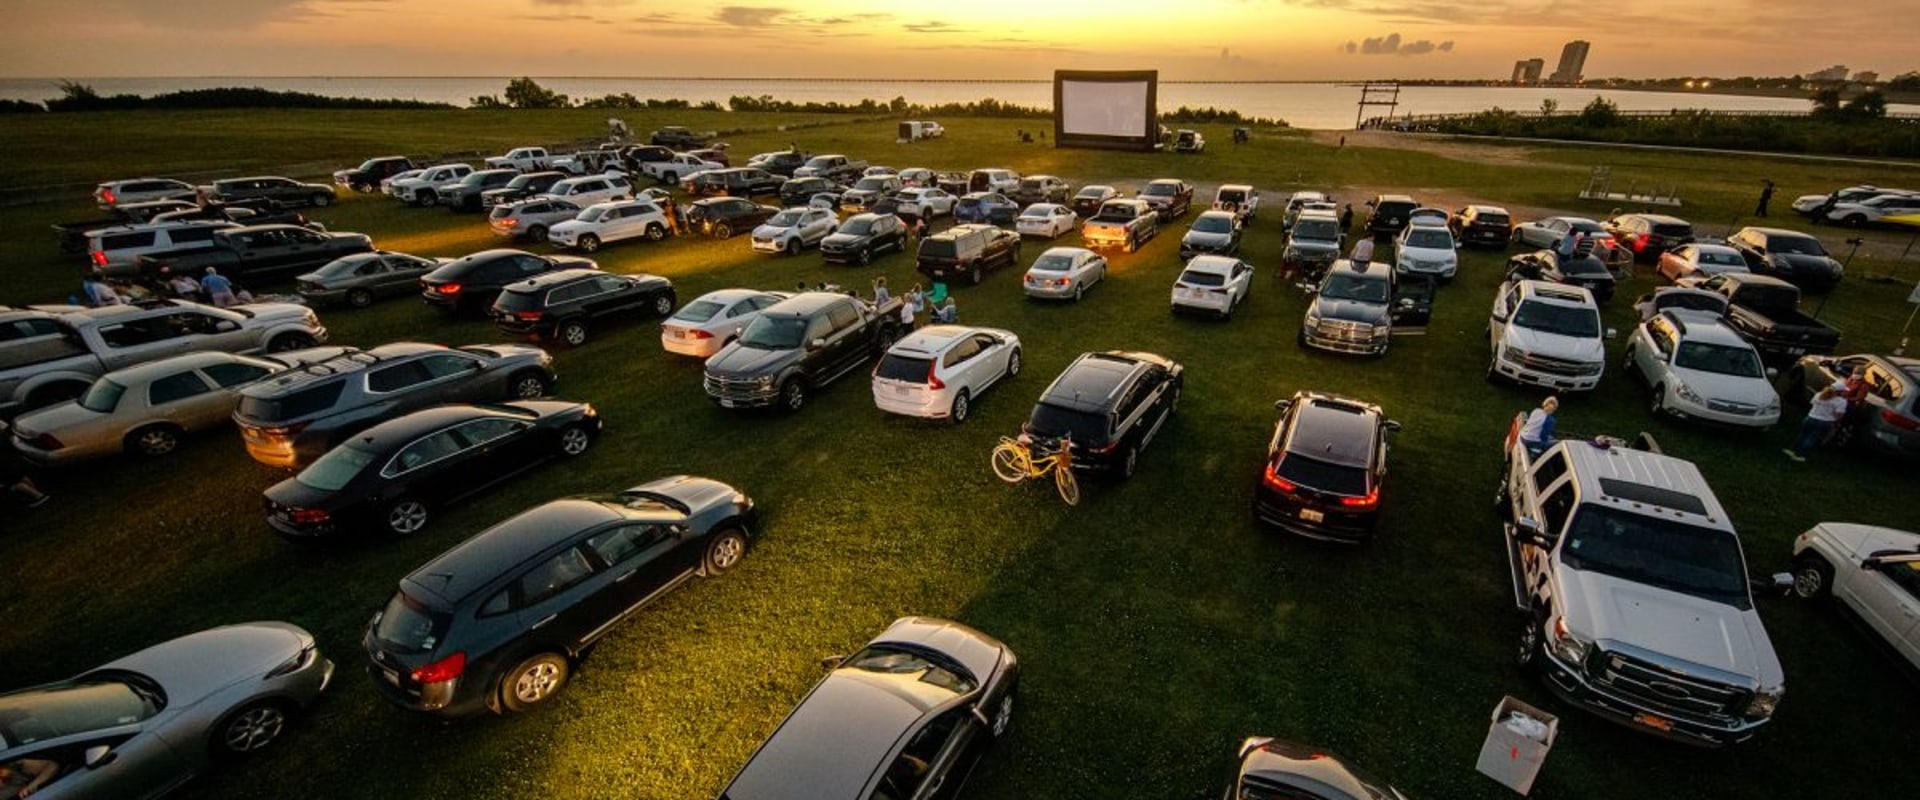 Religious Screenings at Drive-In Theaters in Southern California